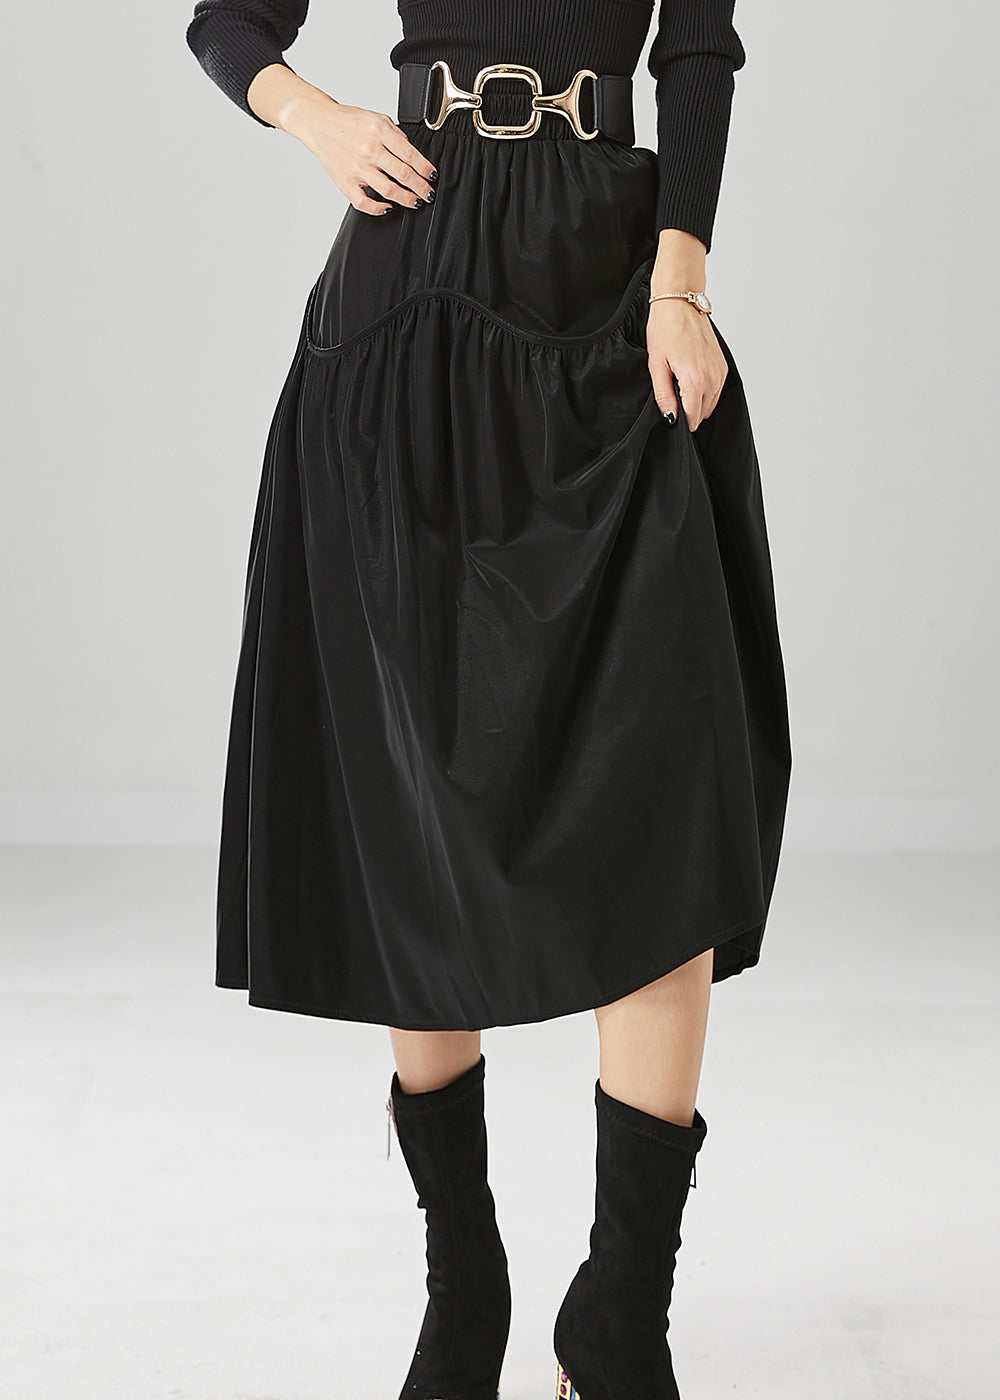 Chic Black Oversized Patchwork Cotton Skirts Fall